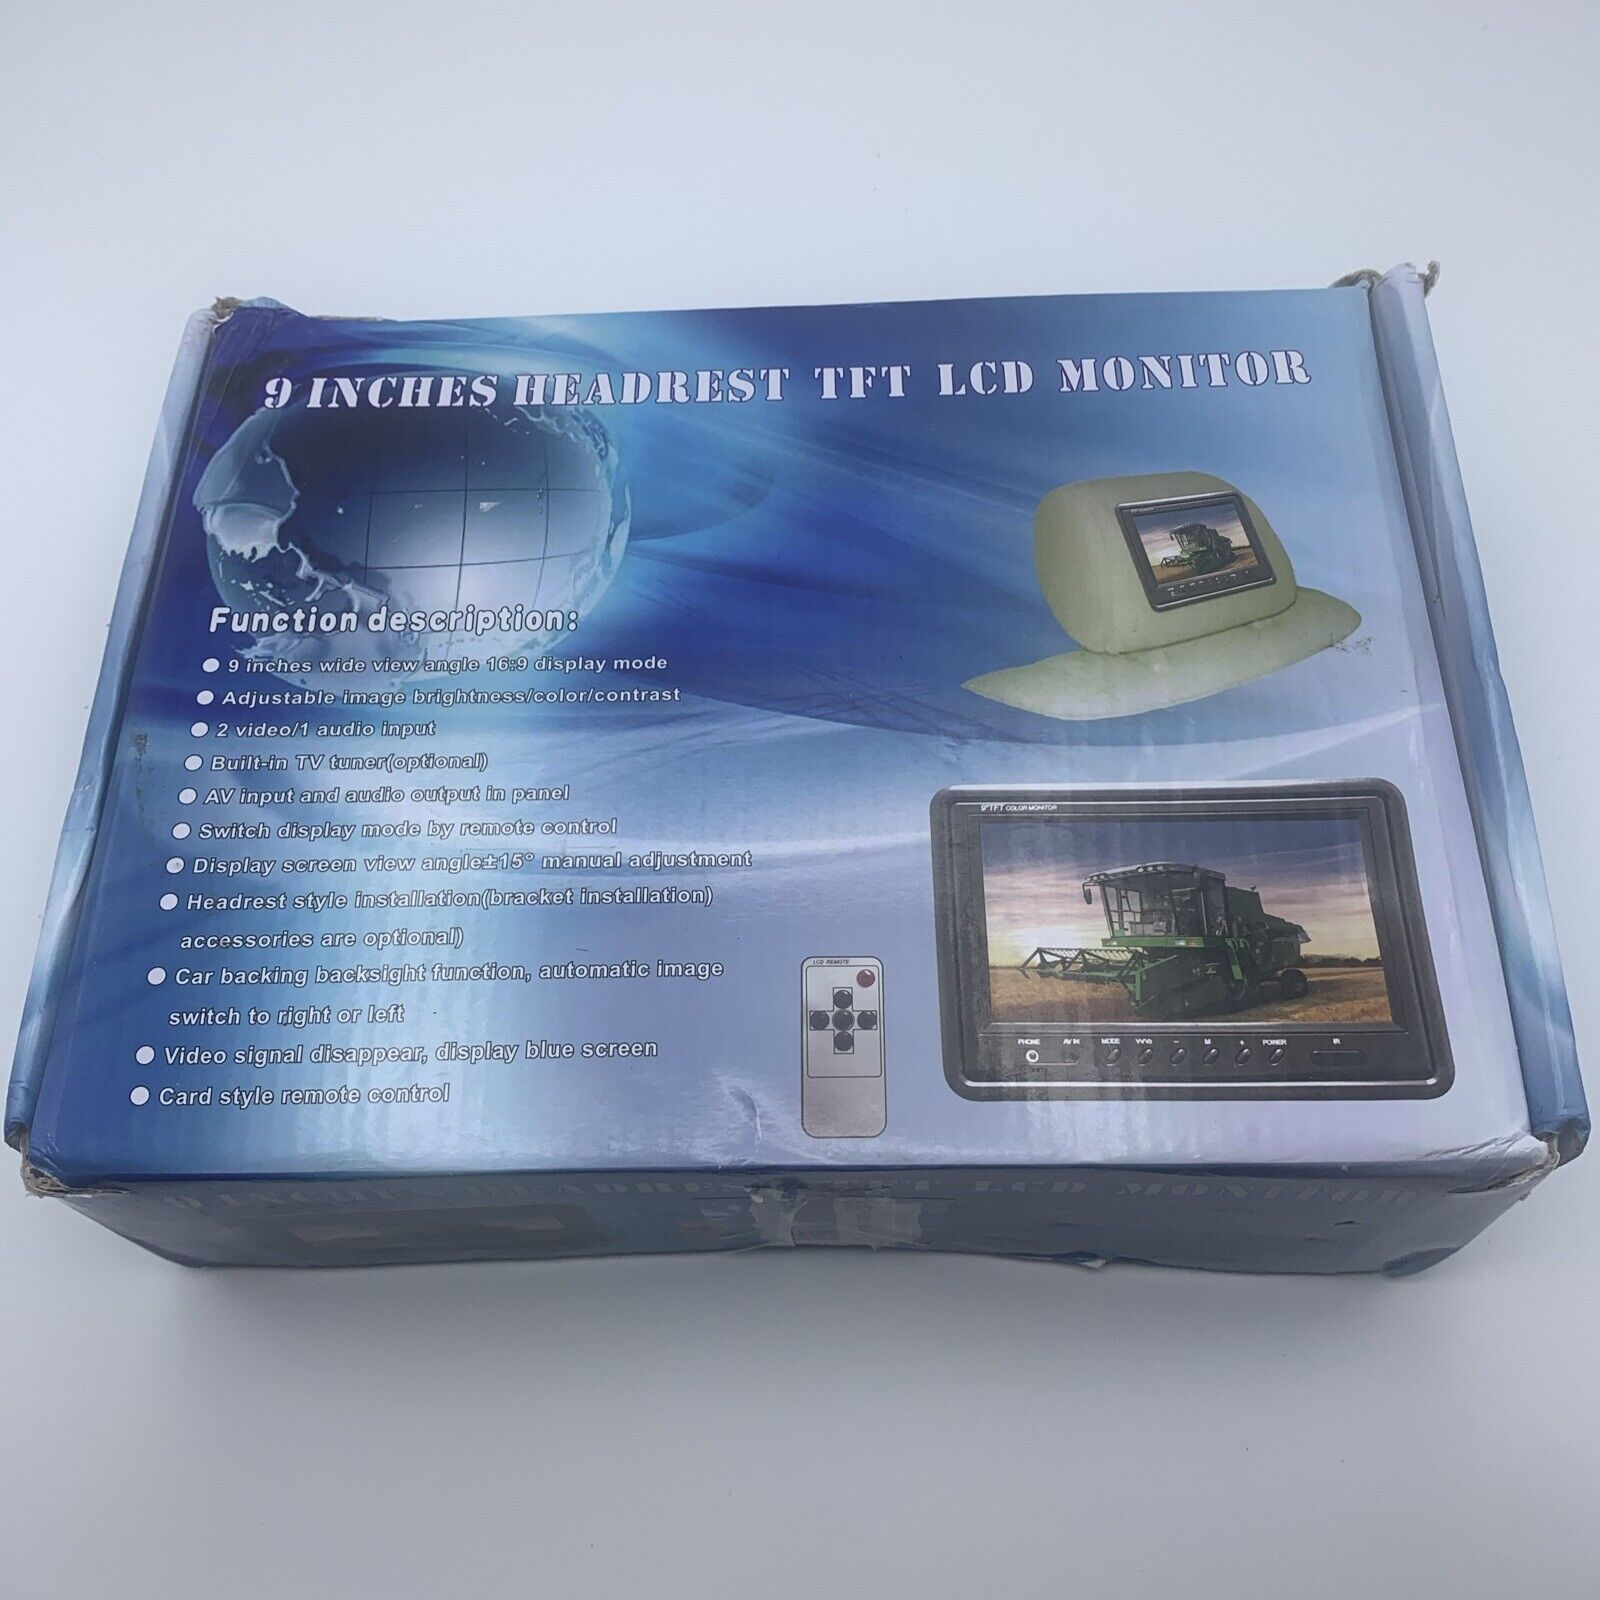 9 Inch Headrest TFT LCD Monitor Original Package